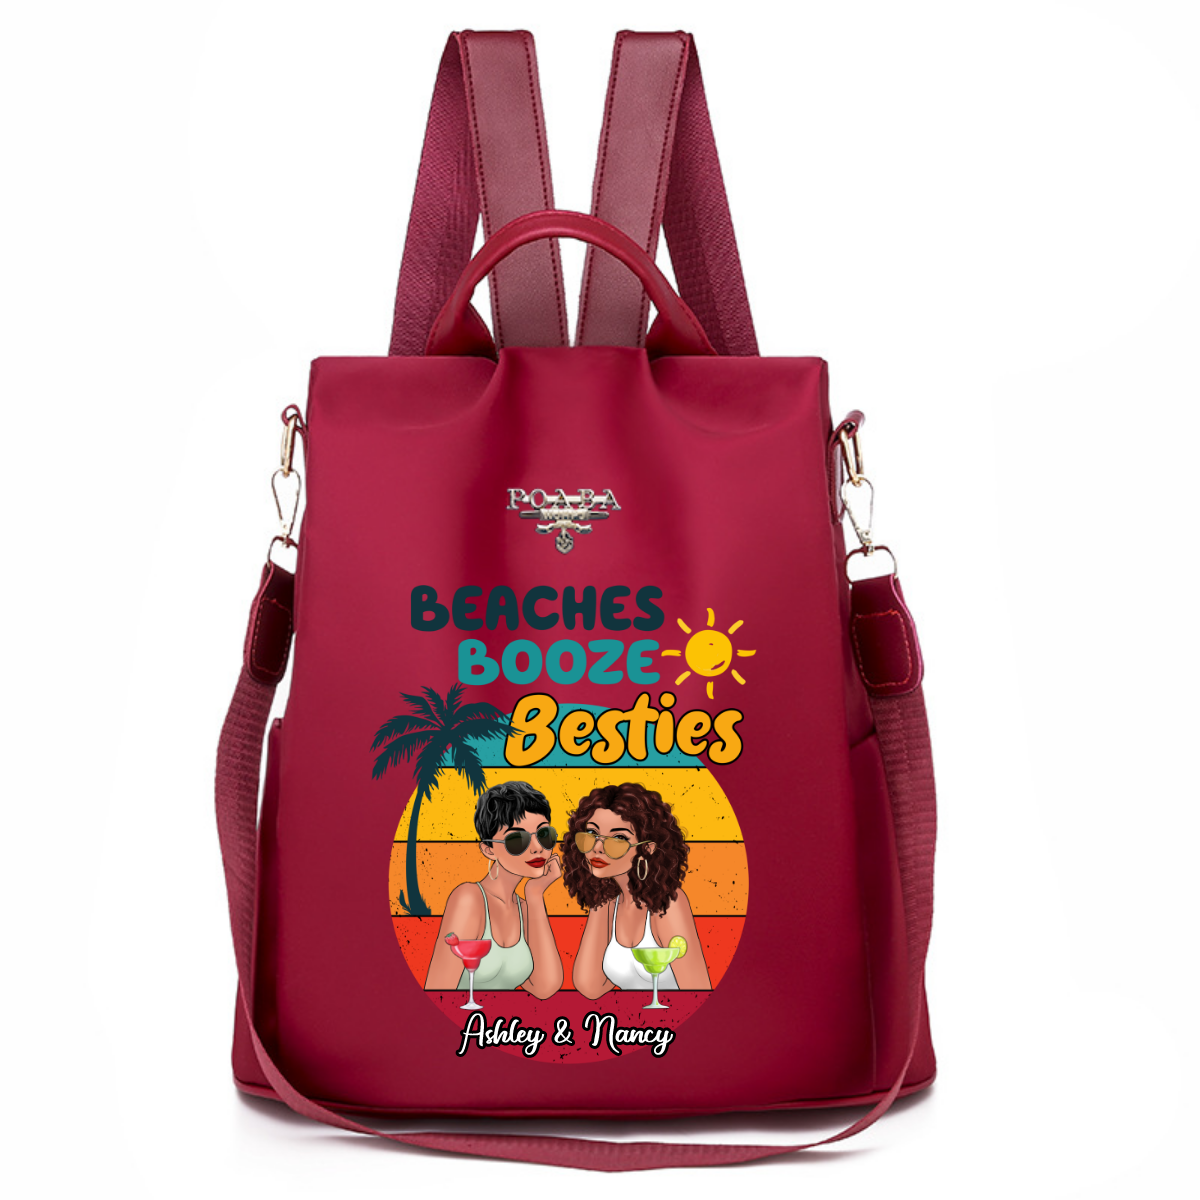 Beaches Booze Summer Fashion Besties Personalized Backpack